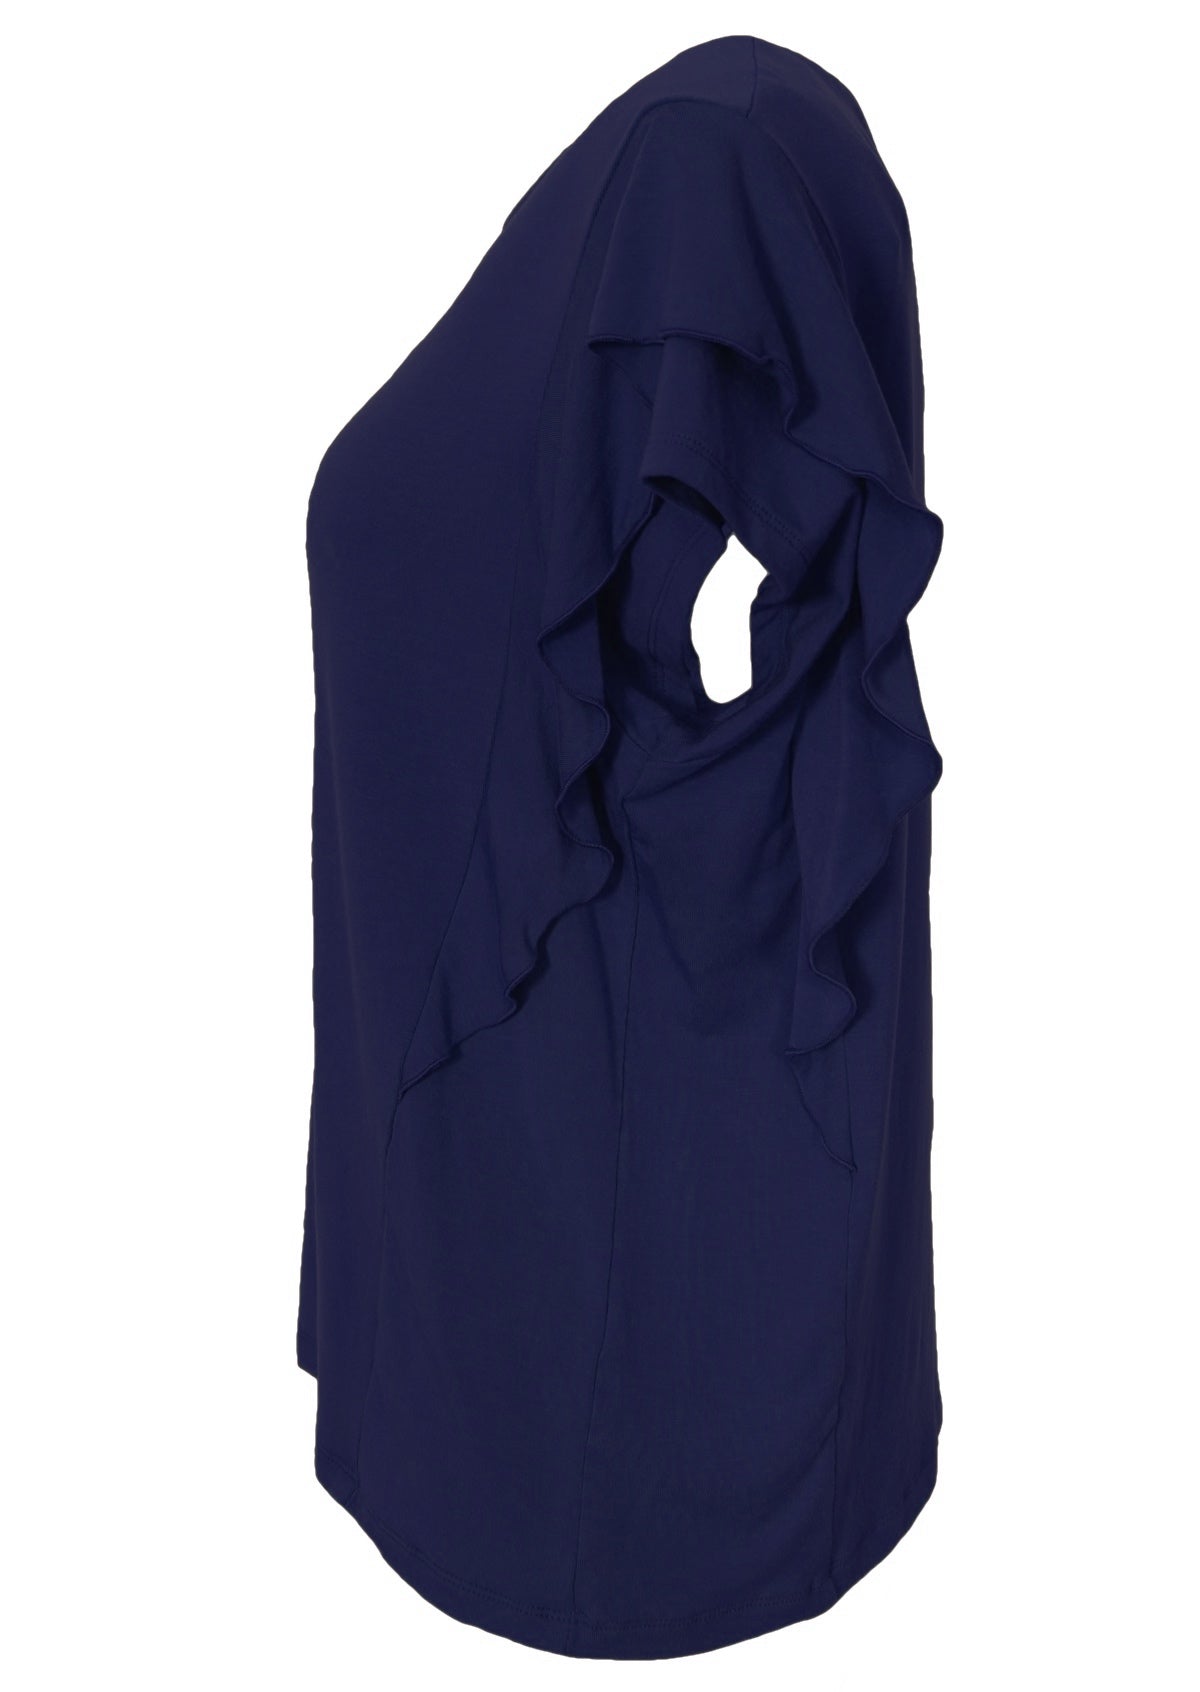 Side view of a navy blue ruffle rayon top.